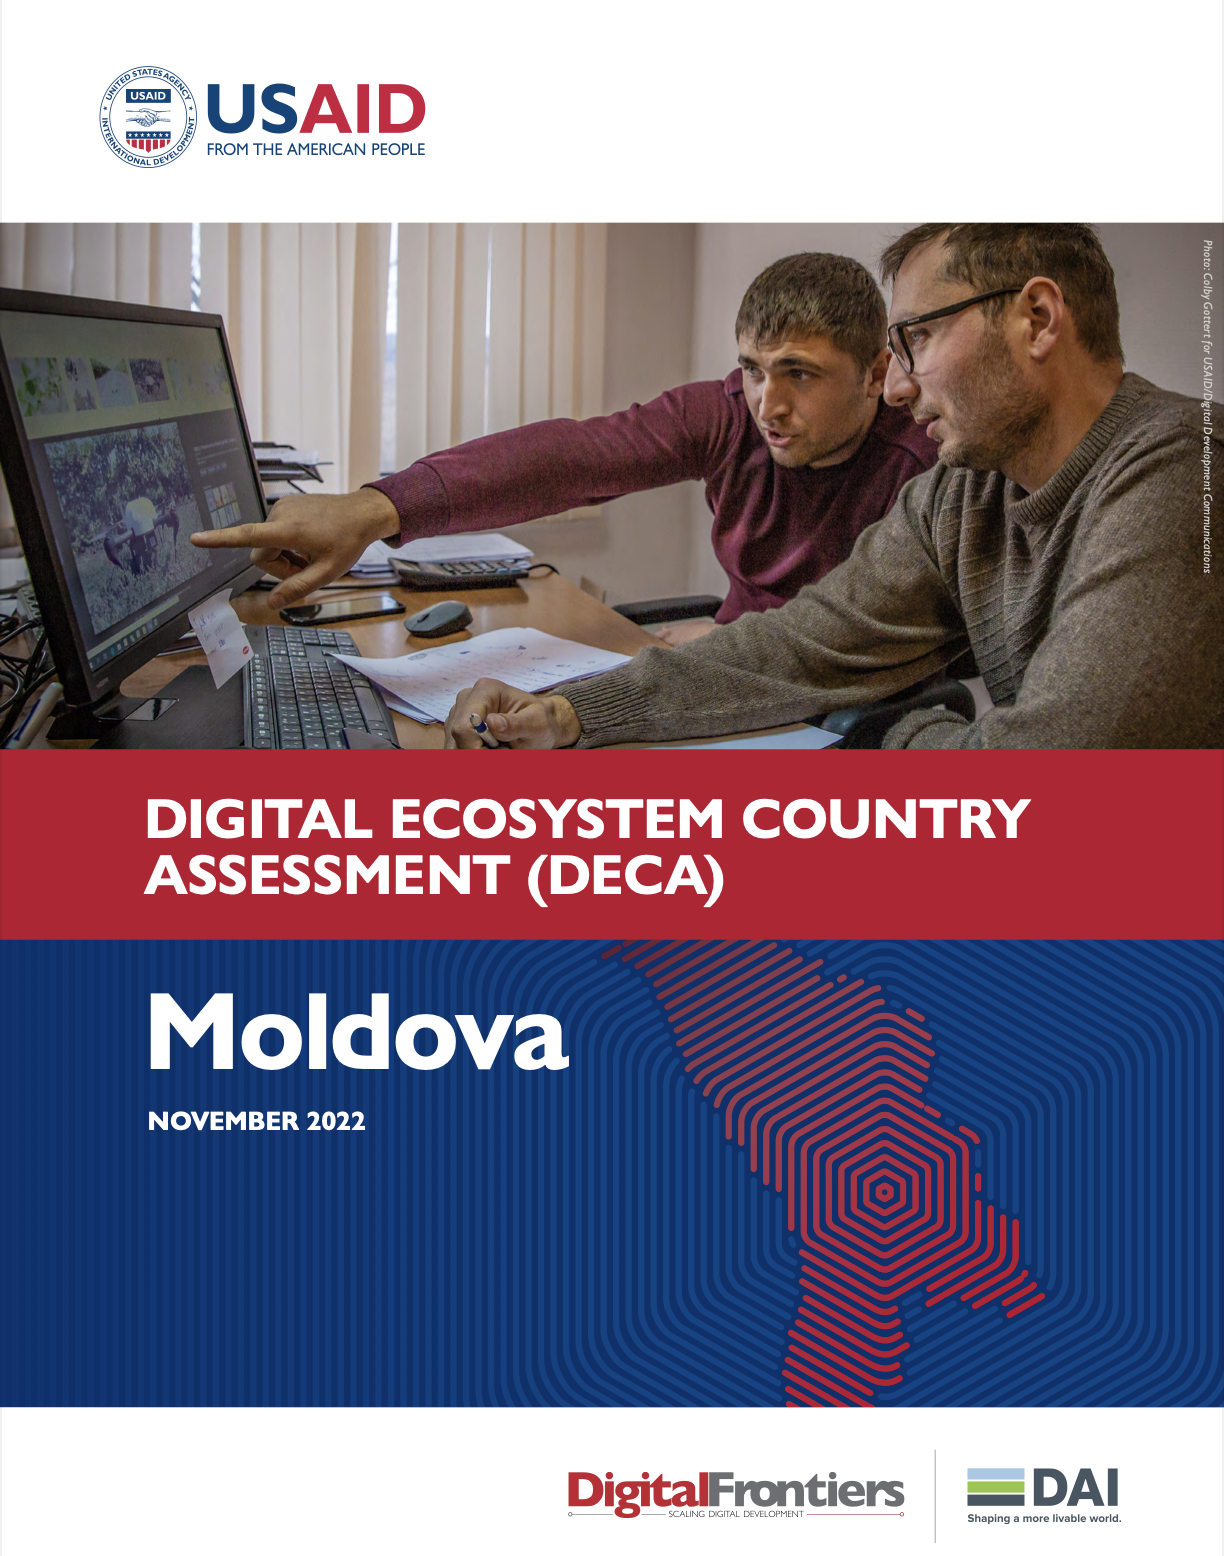 Two men looking intently at a computer screen on the cover of Moldova's Digital Ecosystem Country Assessment (DECA).